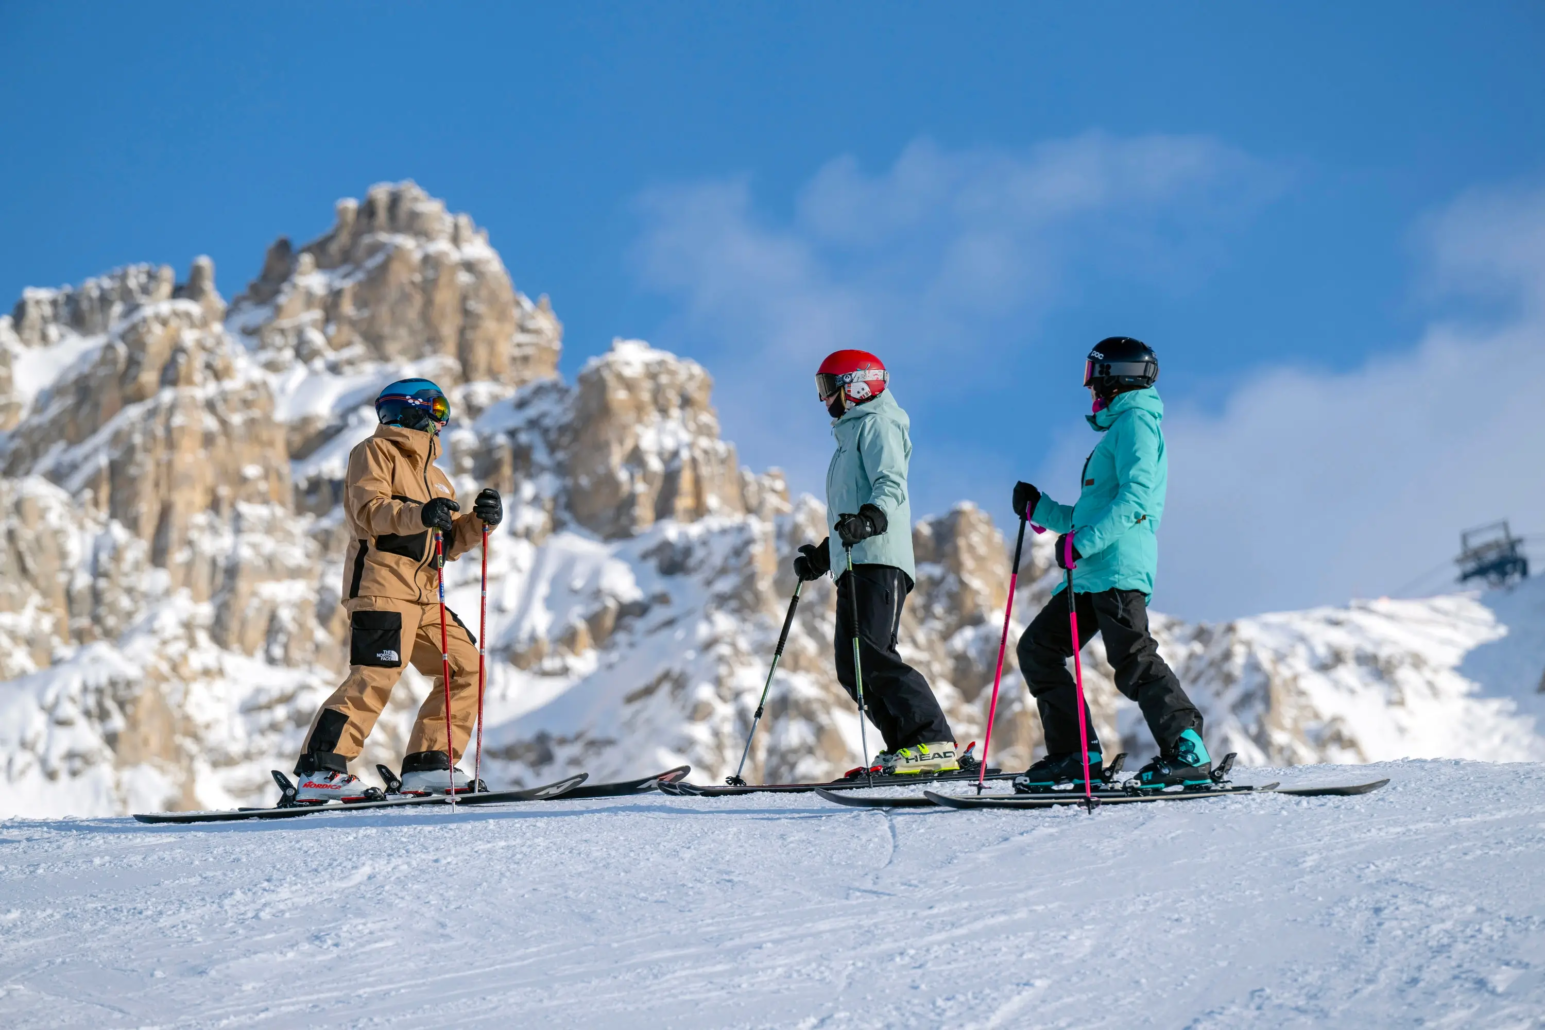 Planning for your first ski trip